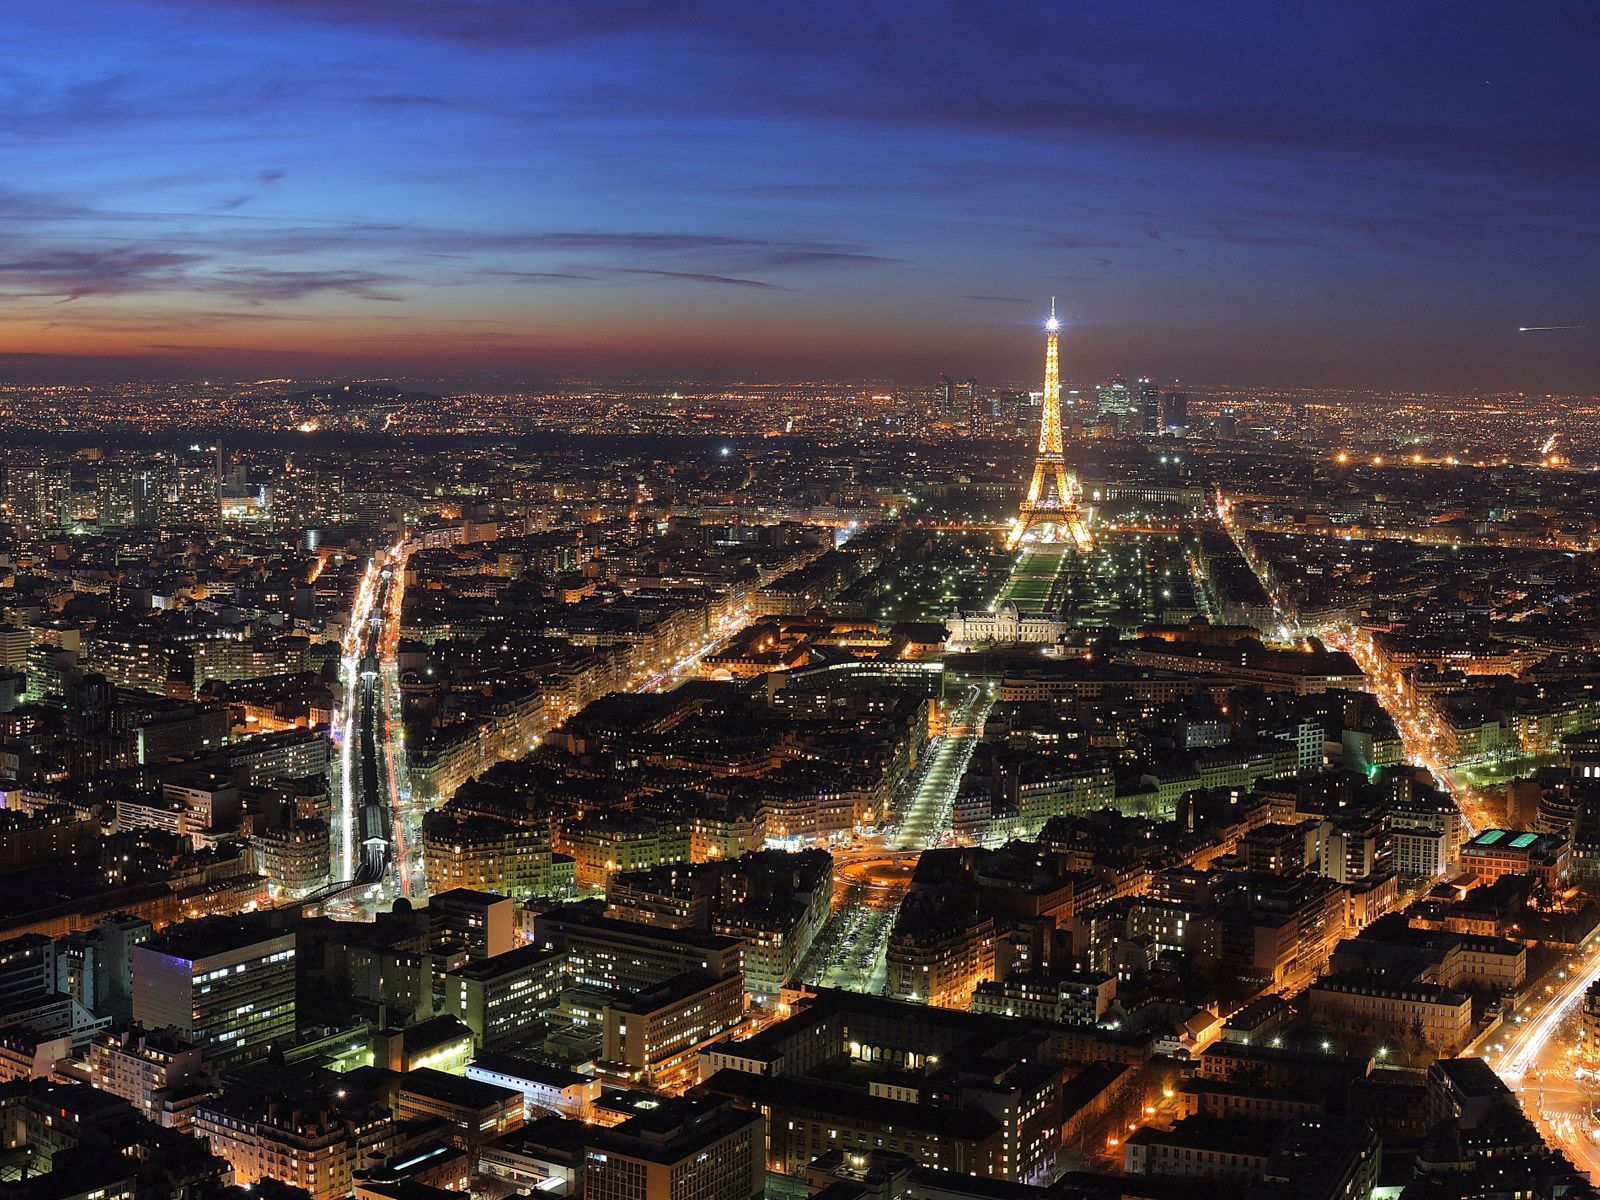 eiffel tower, paris, cities, night, view from above, city lights, france UHD